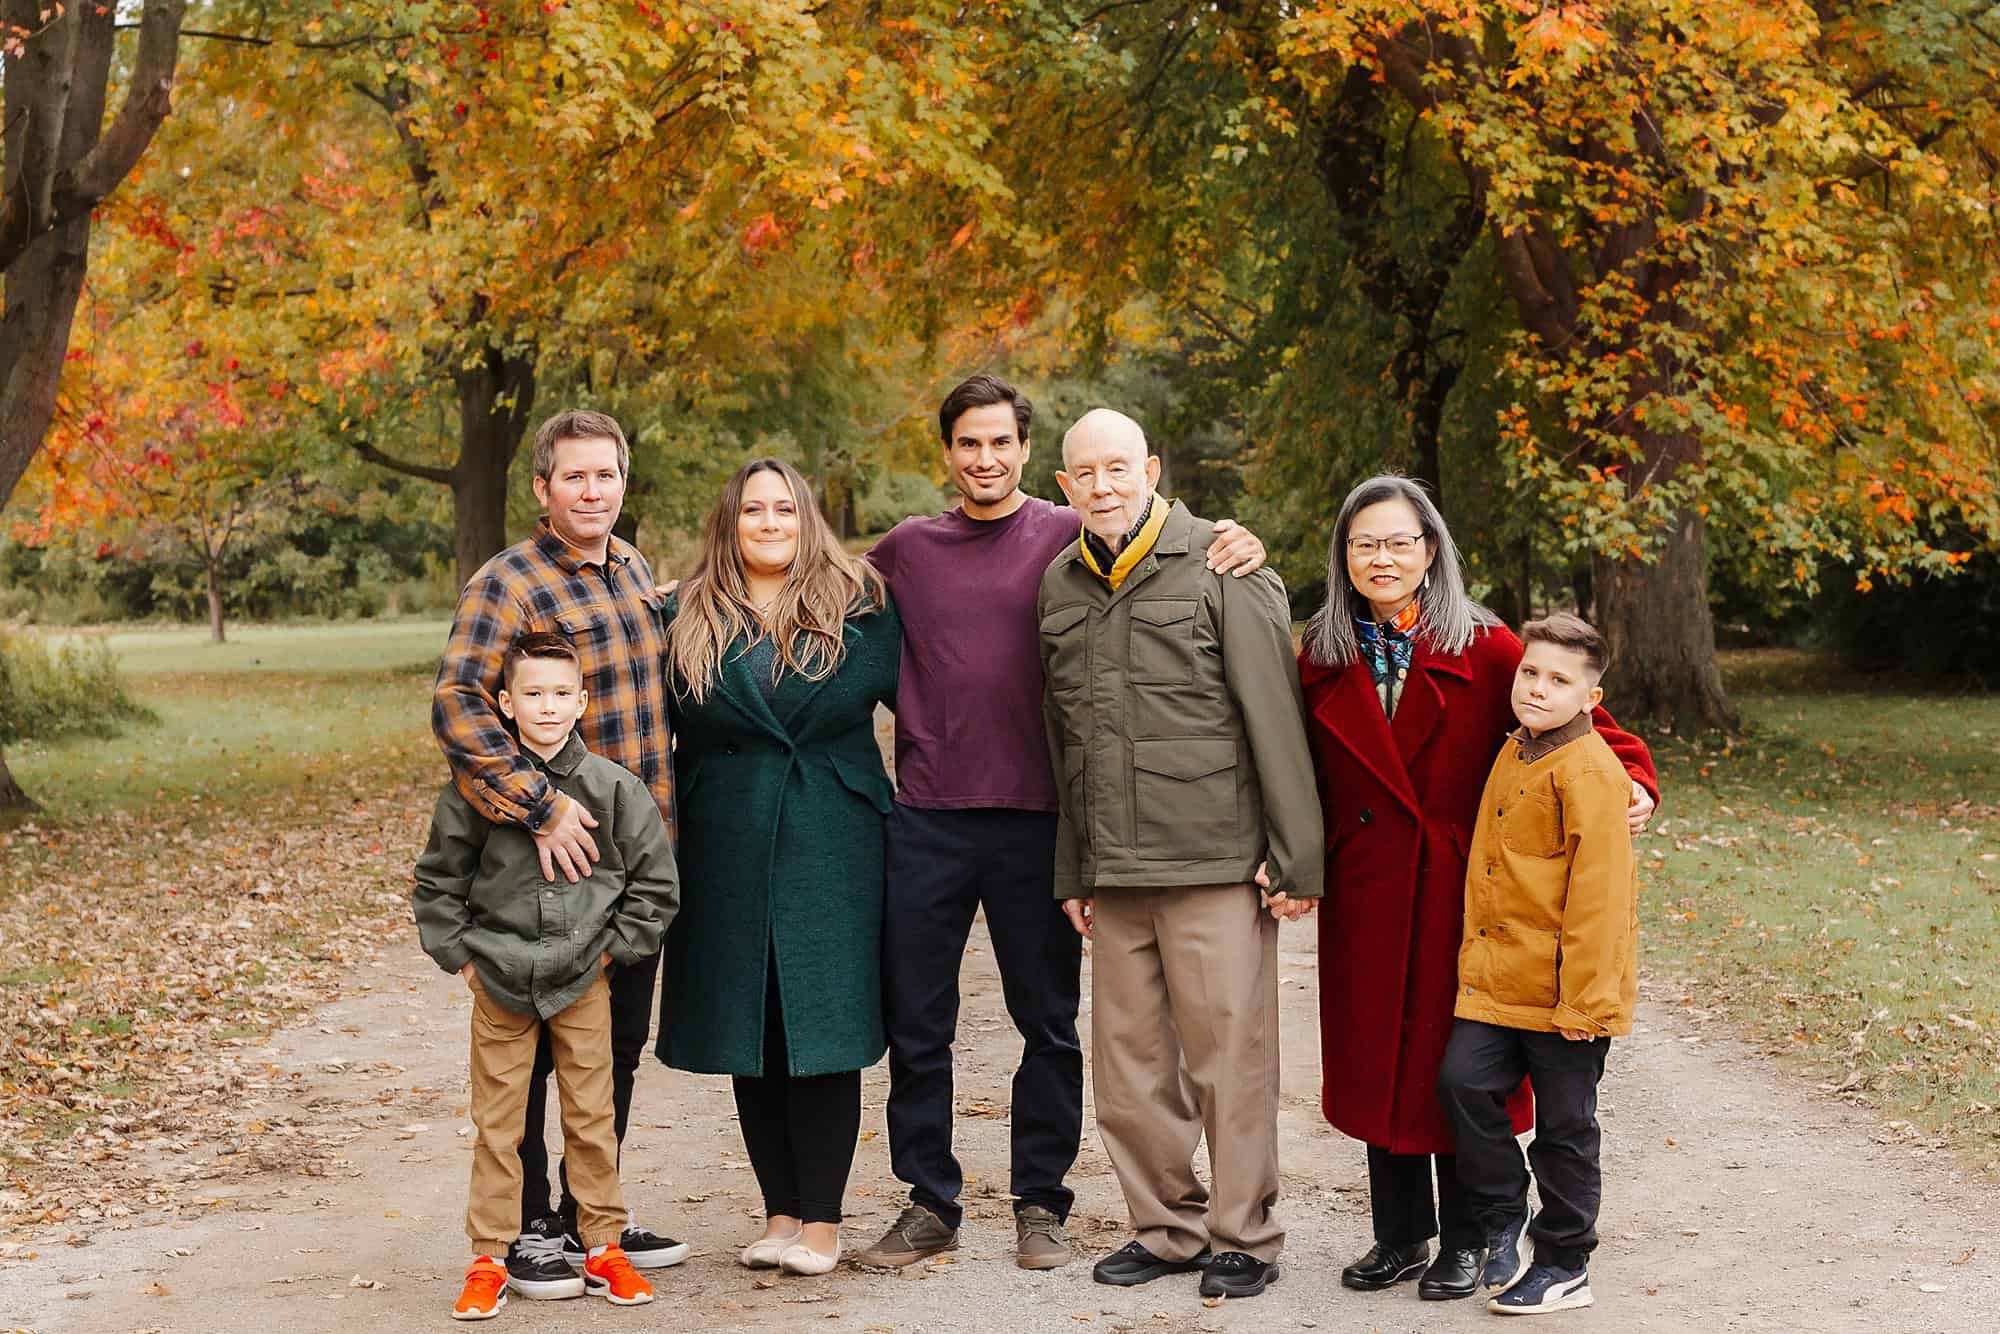 A family of 7 with three generations stands in a park path holding hands in fall before visiting dynamo gymnastics